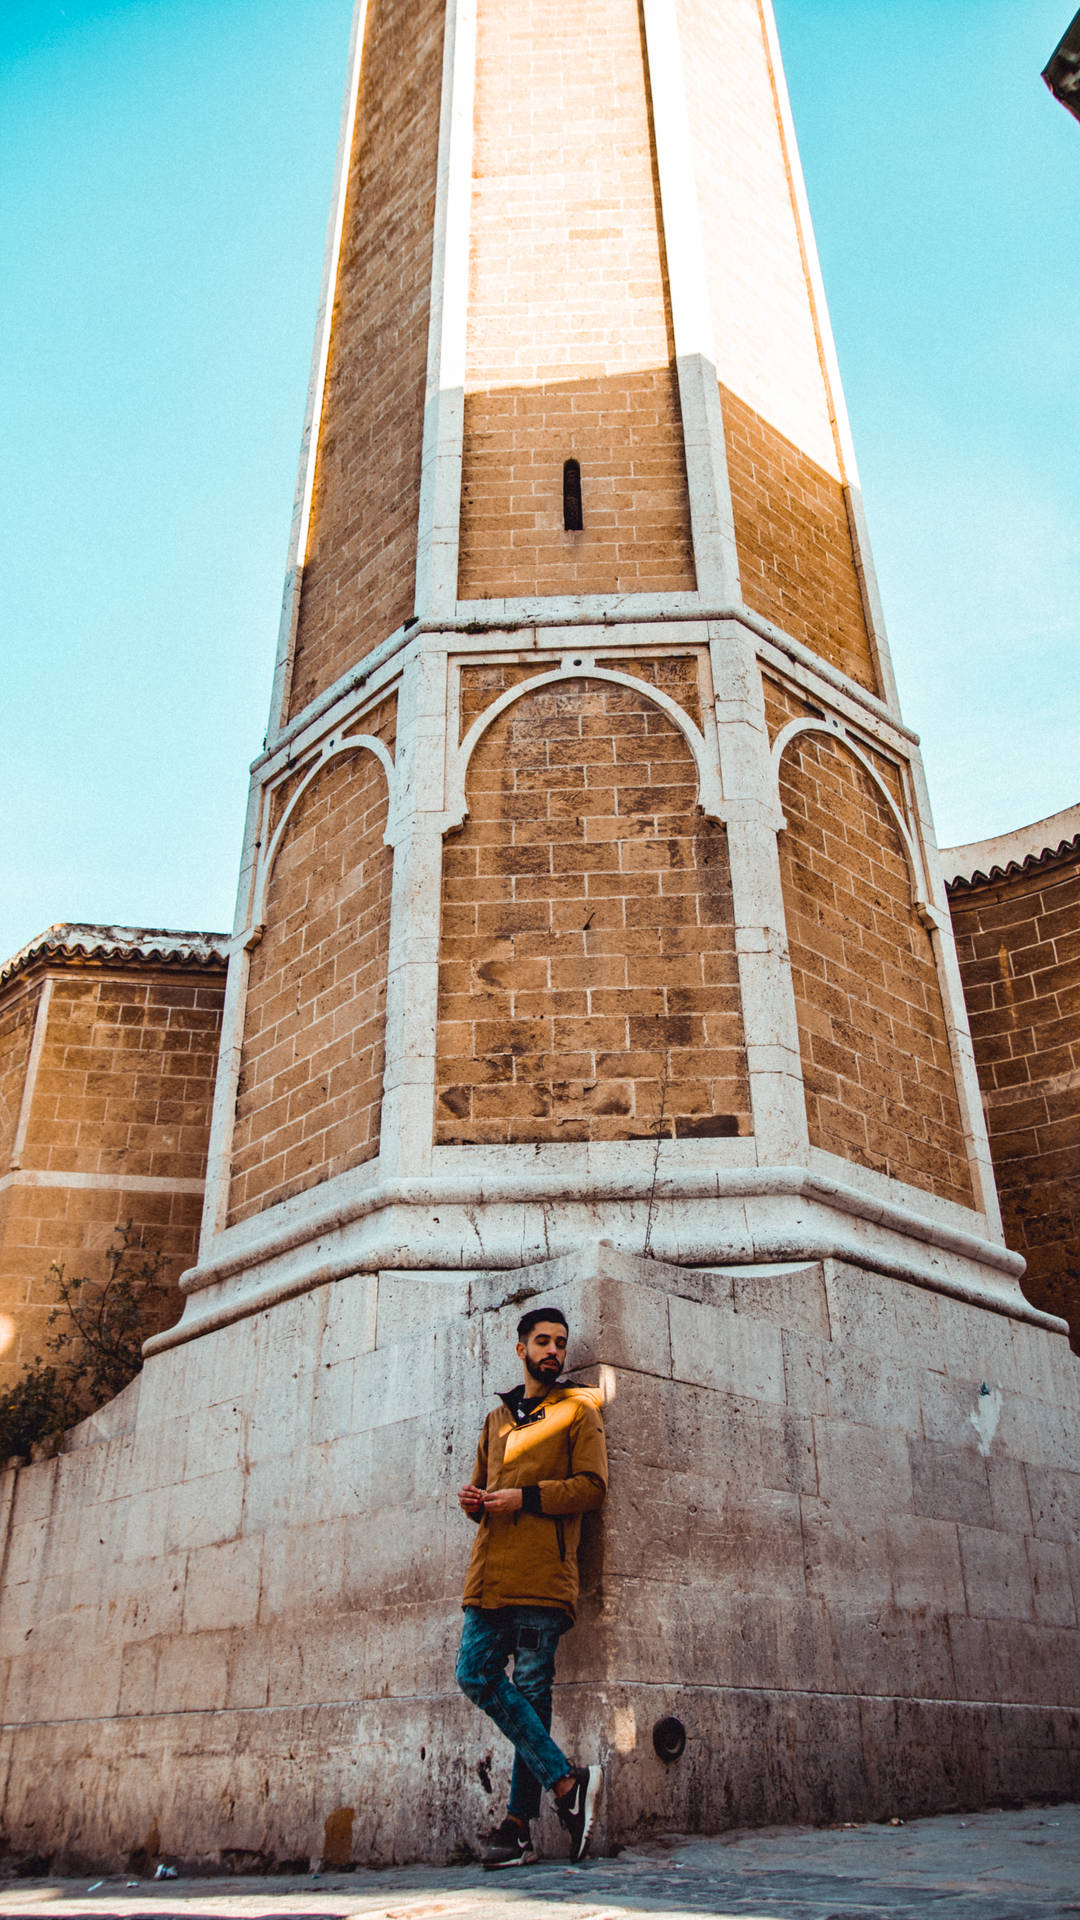 Boy And Tower In Tunisia